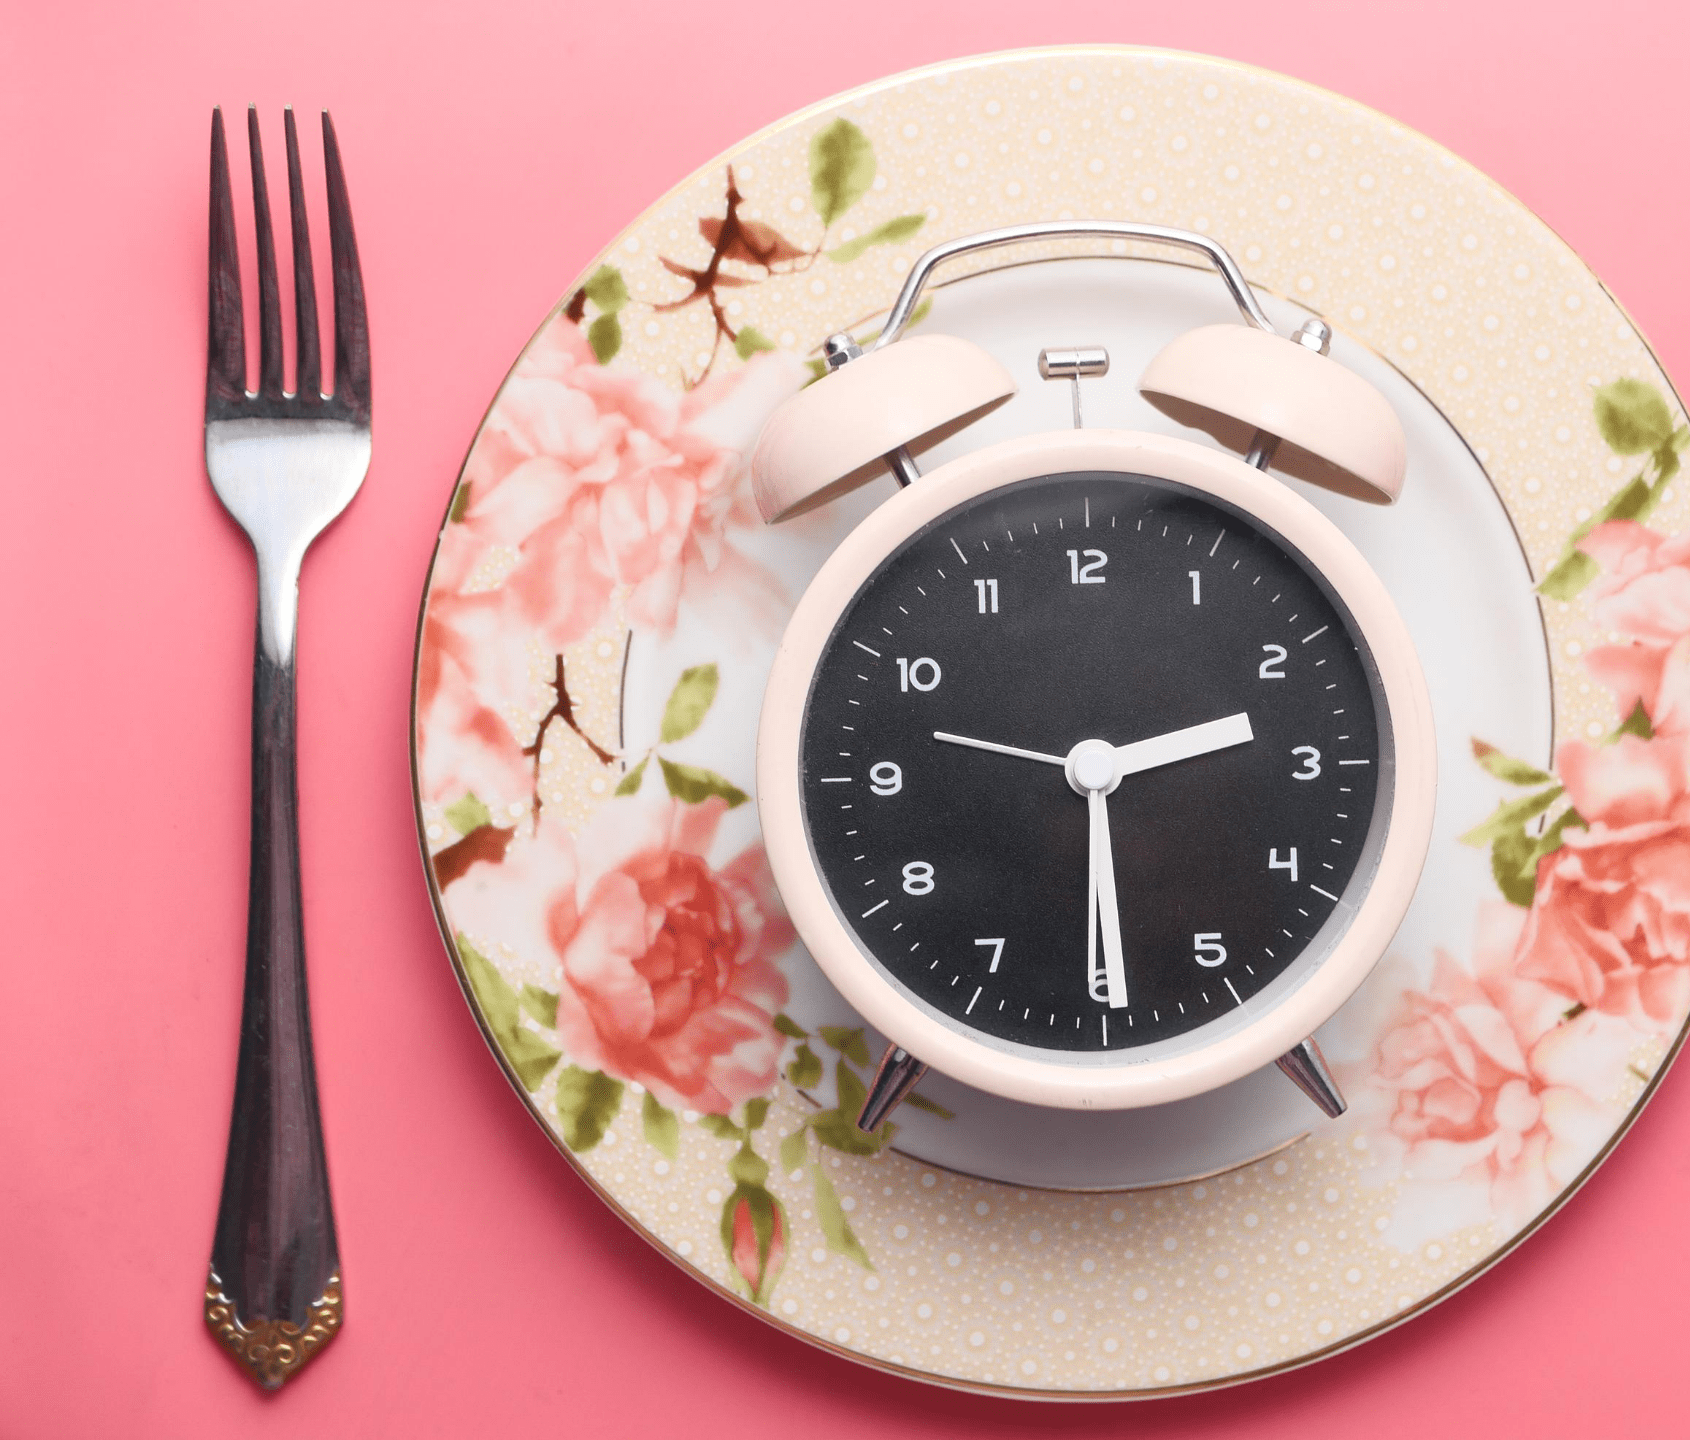 Intermittent Fasting and Eating Disorders